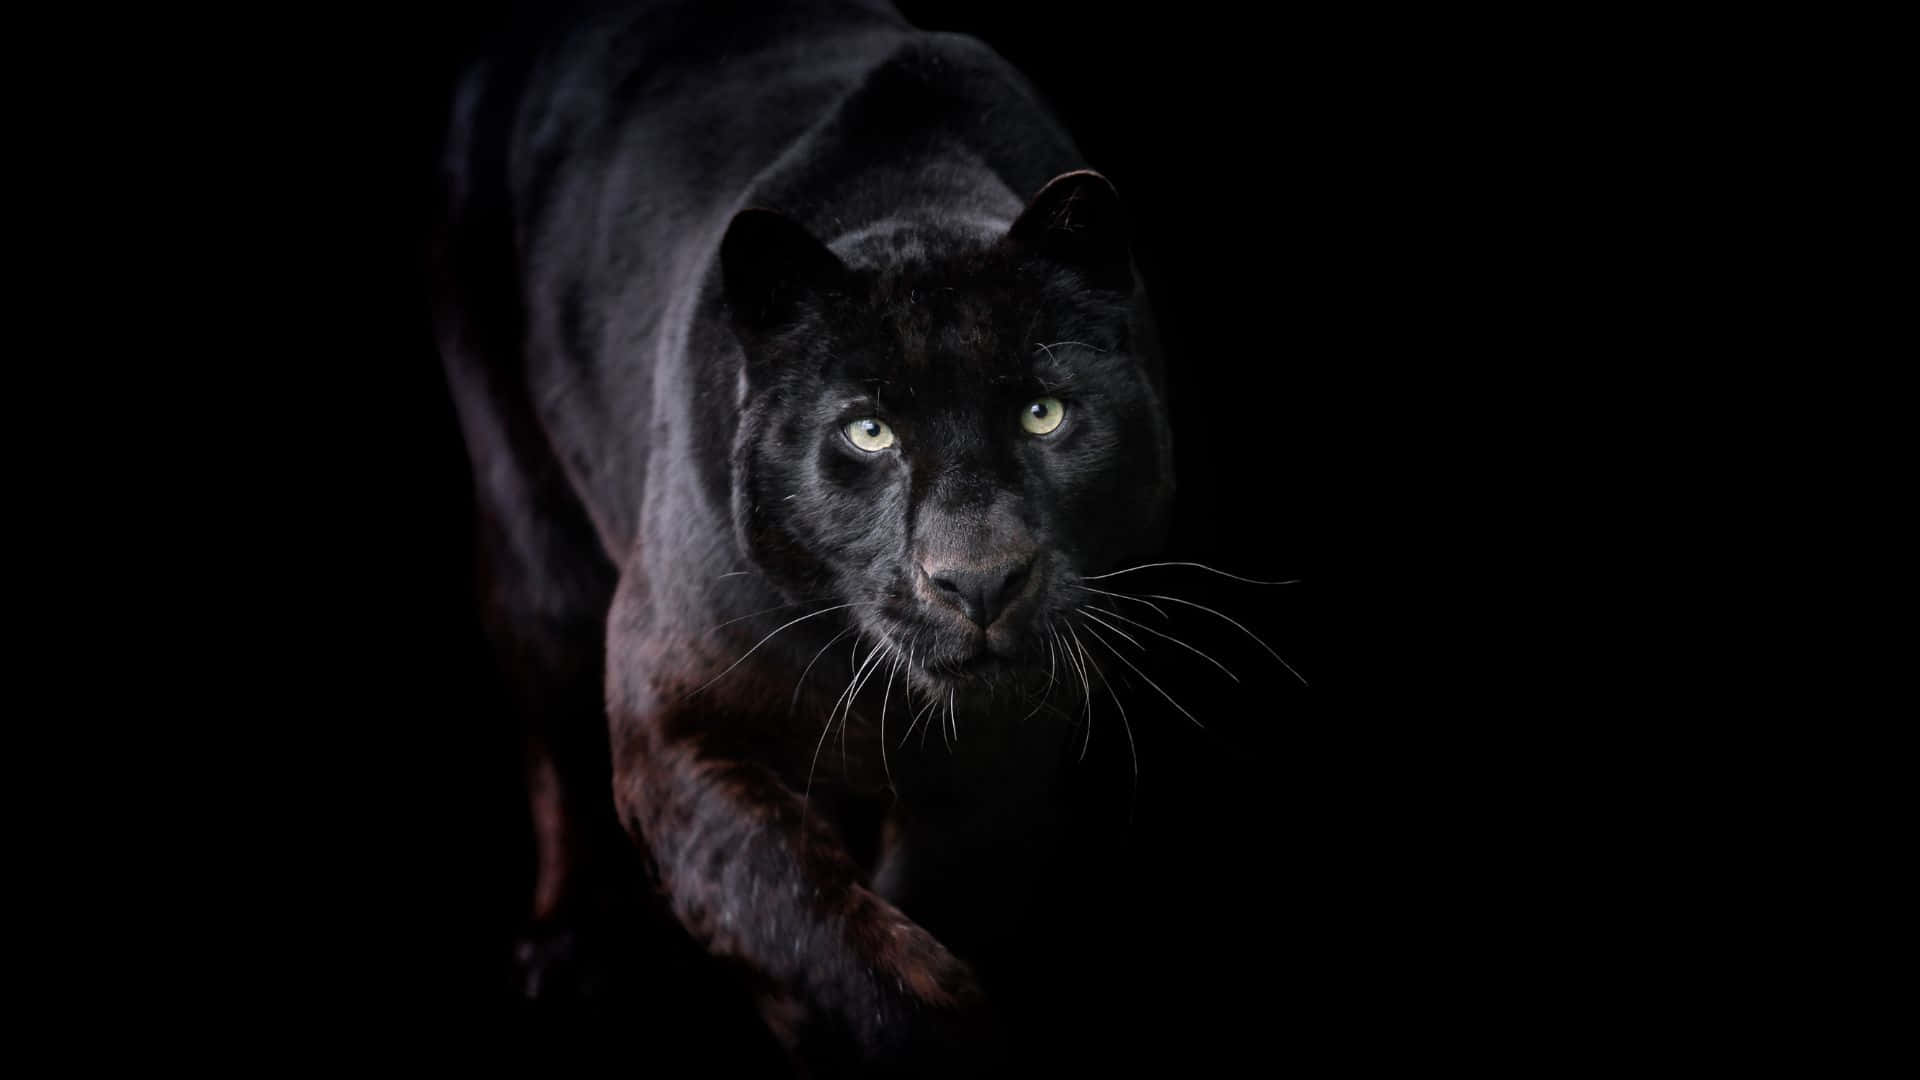 Captivating Panther Stare